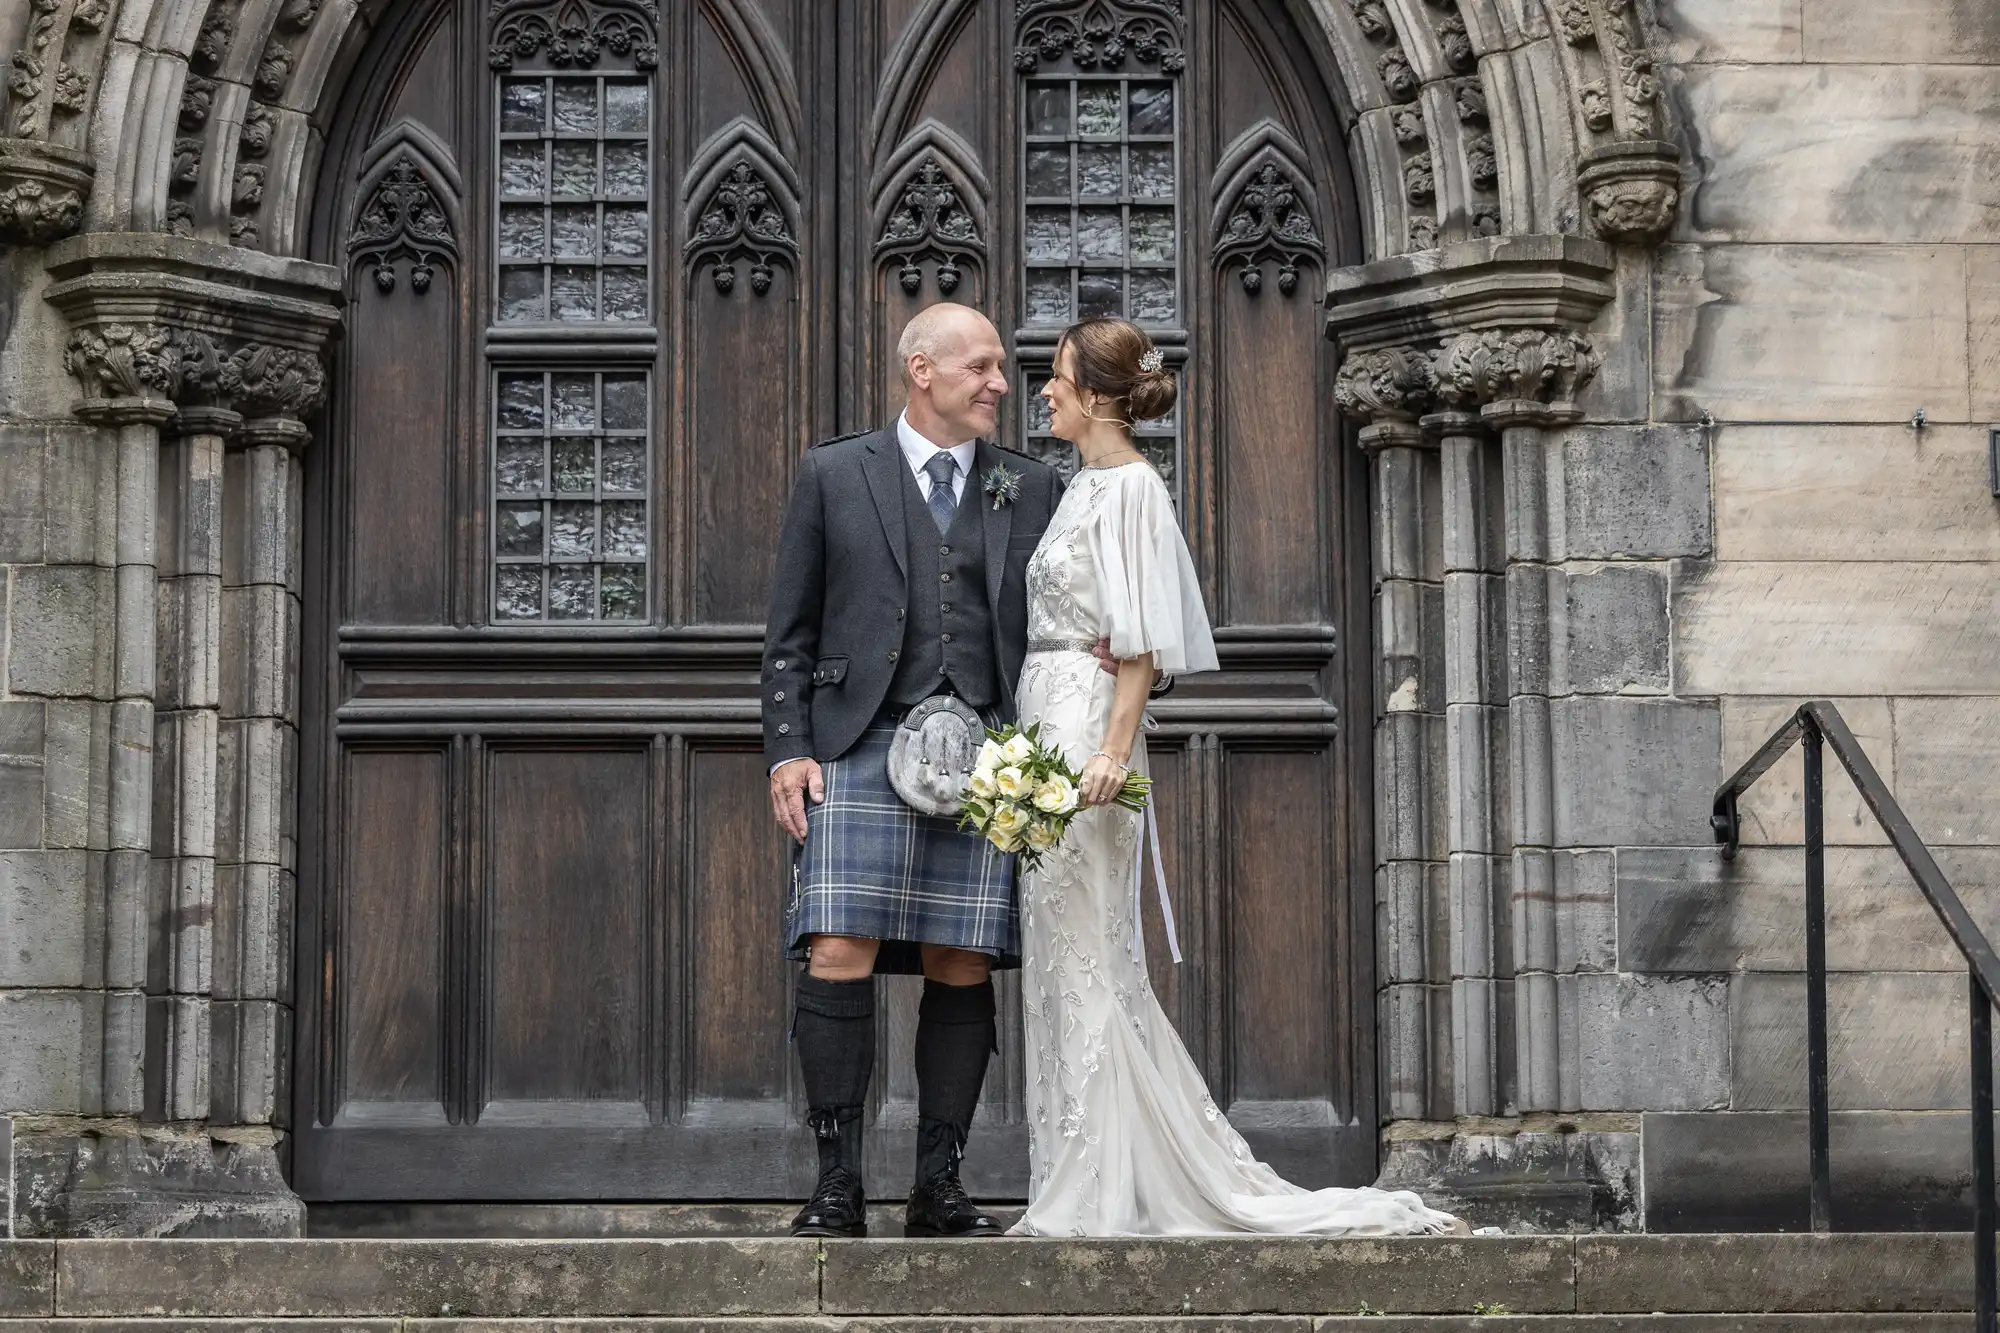 A couple stands in front of a decorative wooden door. The man is wearing a traditional kilt outfit, and the woman is wearing a white dress and holding a bouquet of flowers. They are looking at each other.